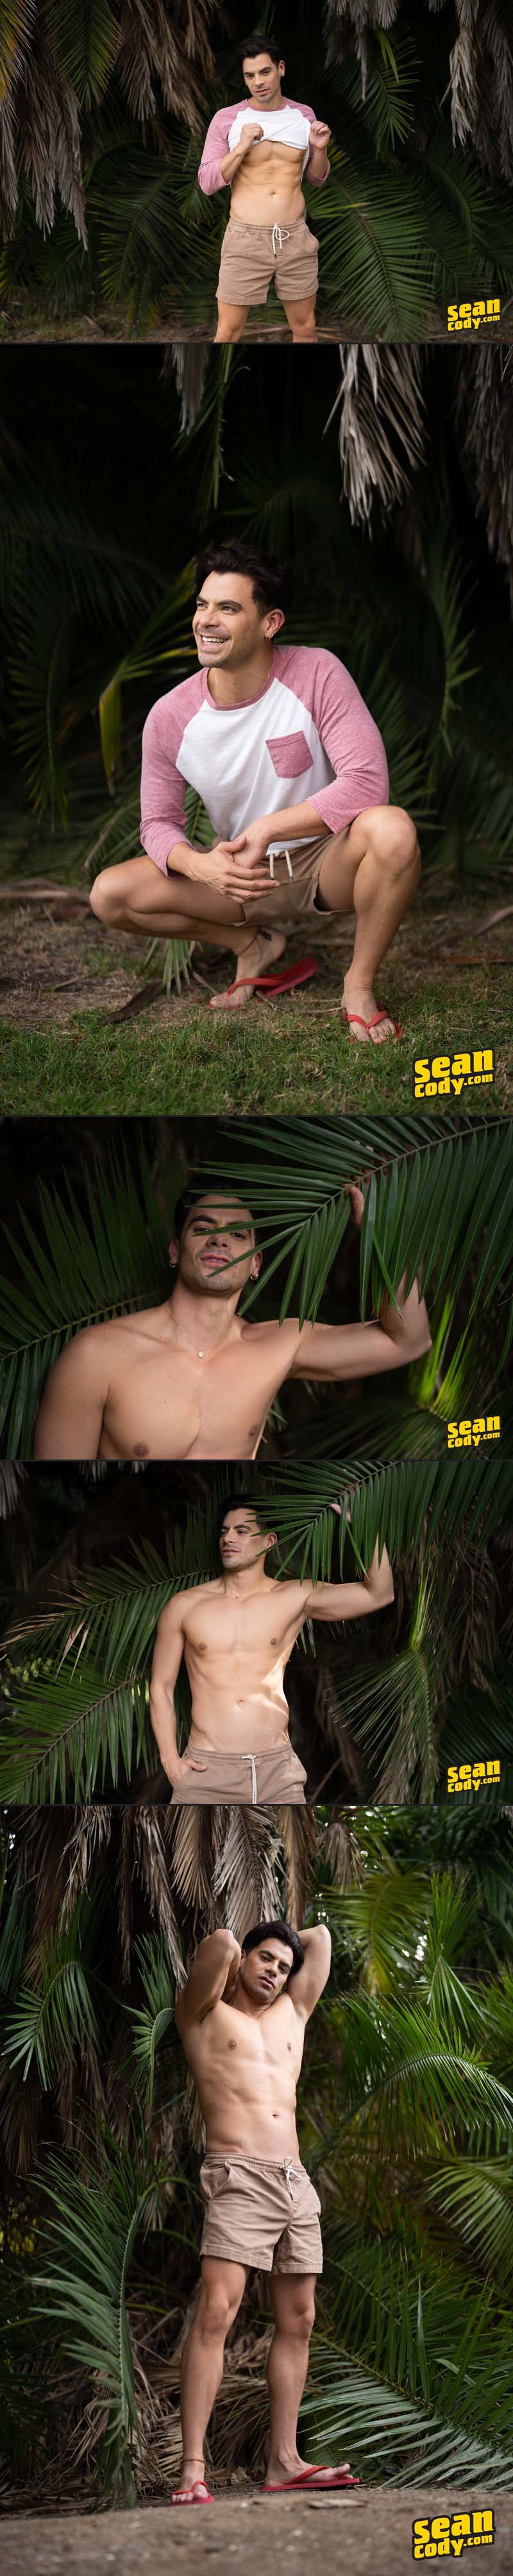 SeanCody Newcomer OLAF's Playful Reveal: From Clothed to Cumming